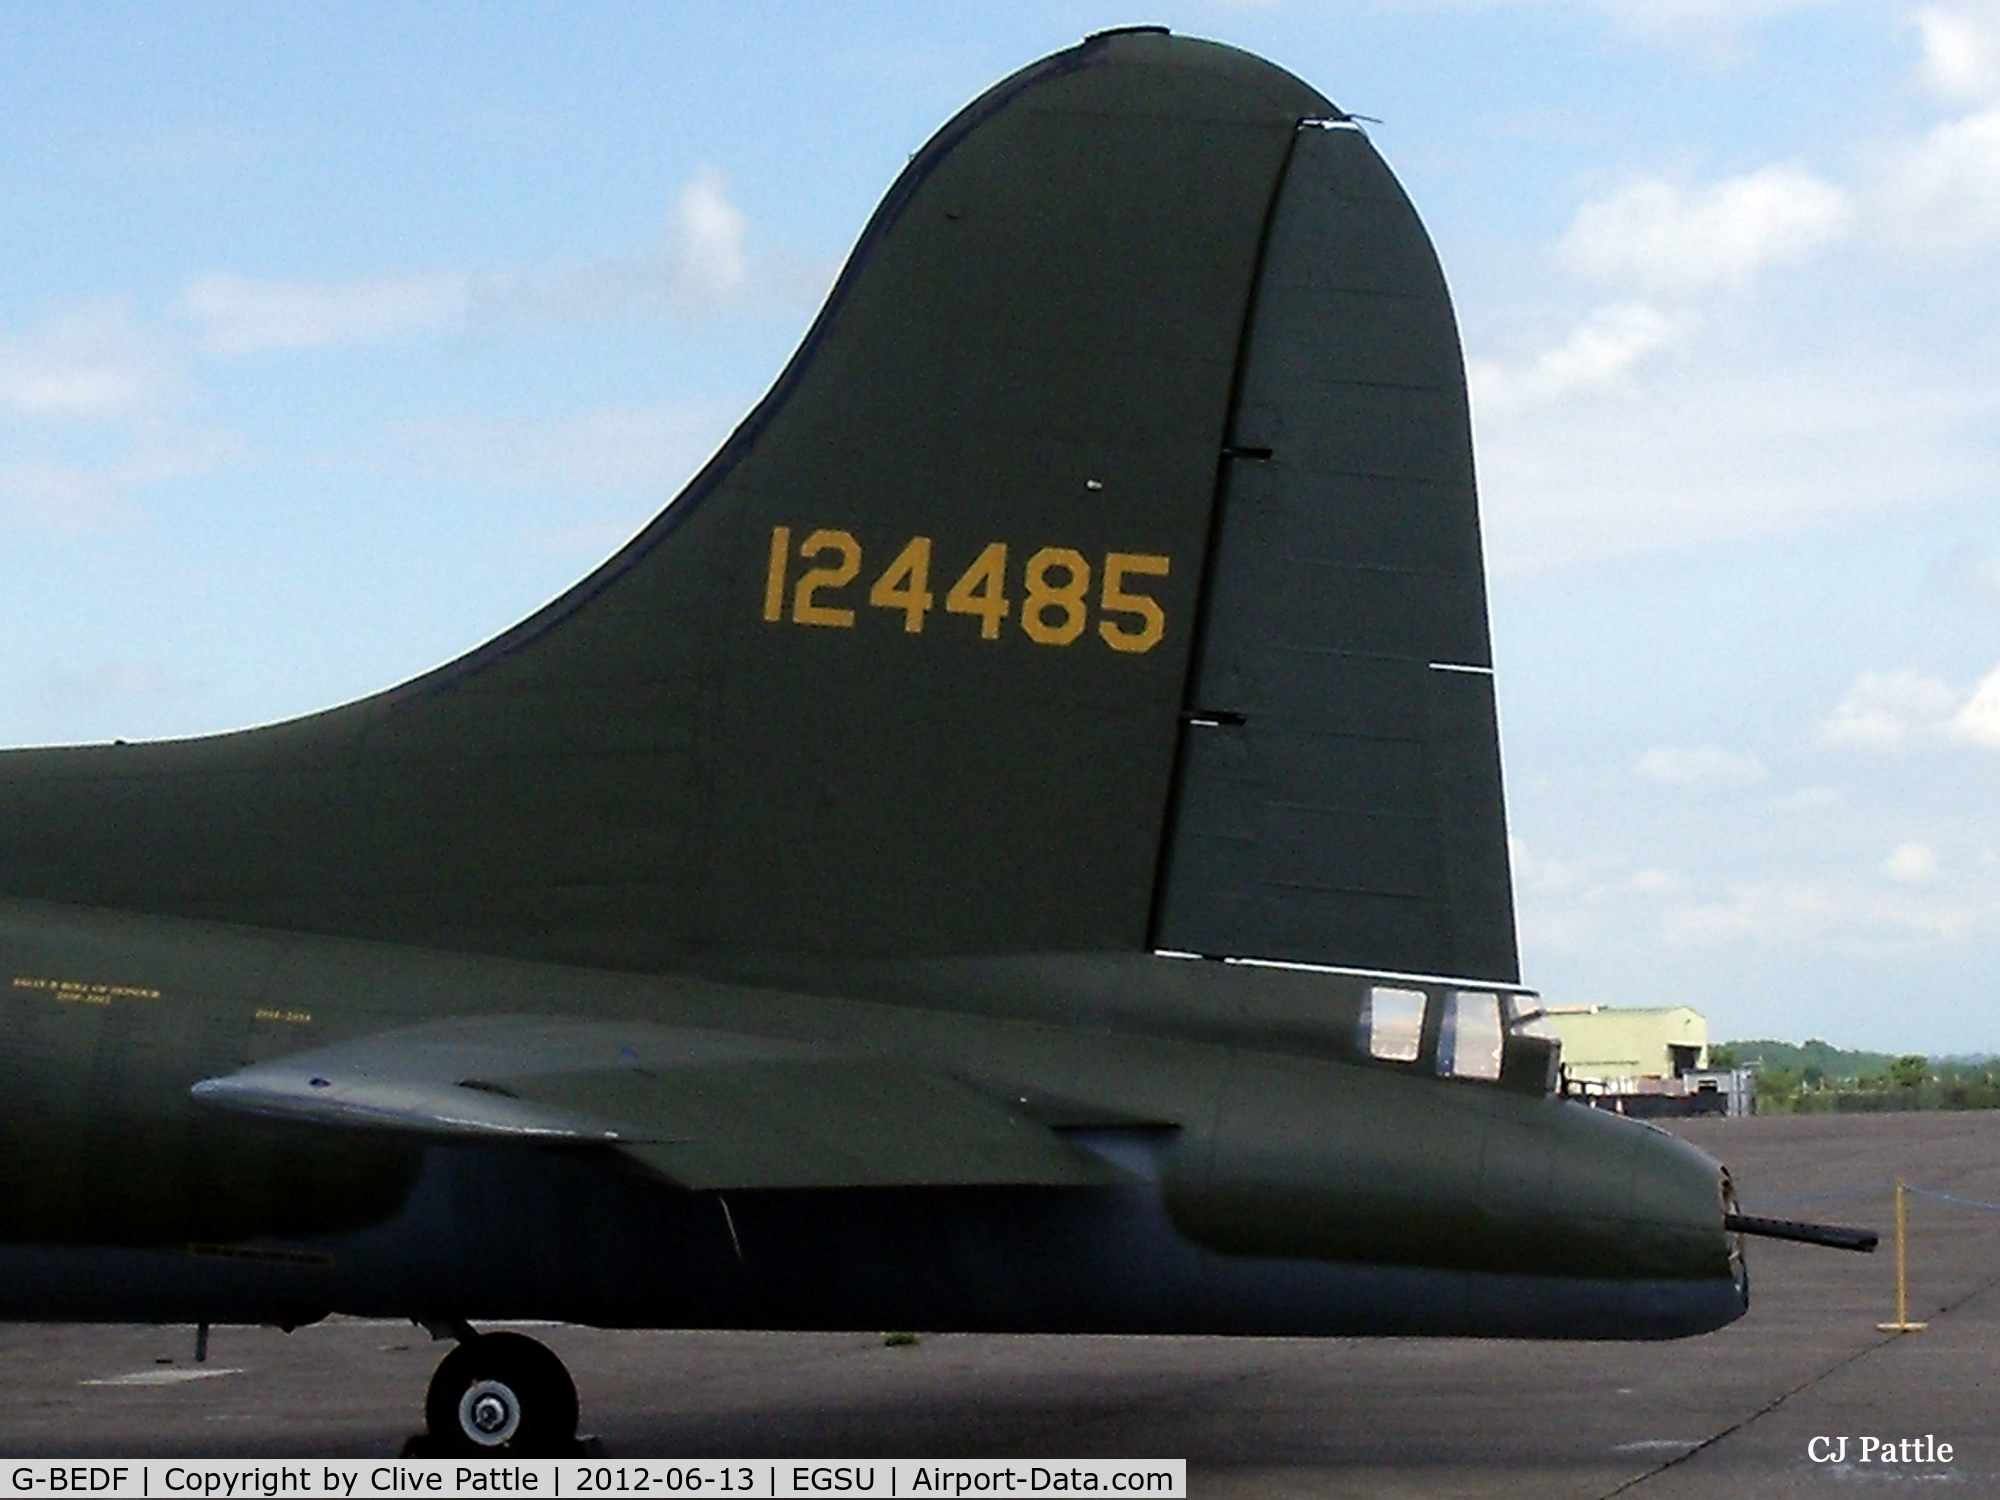 G-BEDF, 1944 Boeing B-17G Flying Fortress C/N 8693, Showing the tail area detail